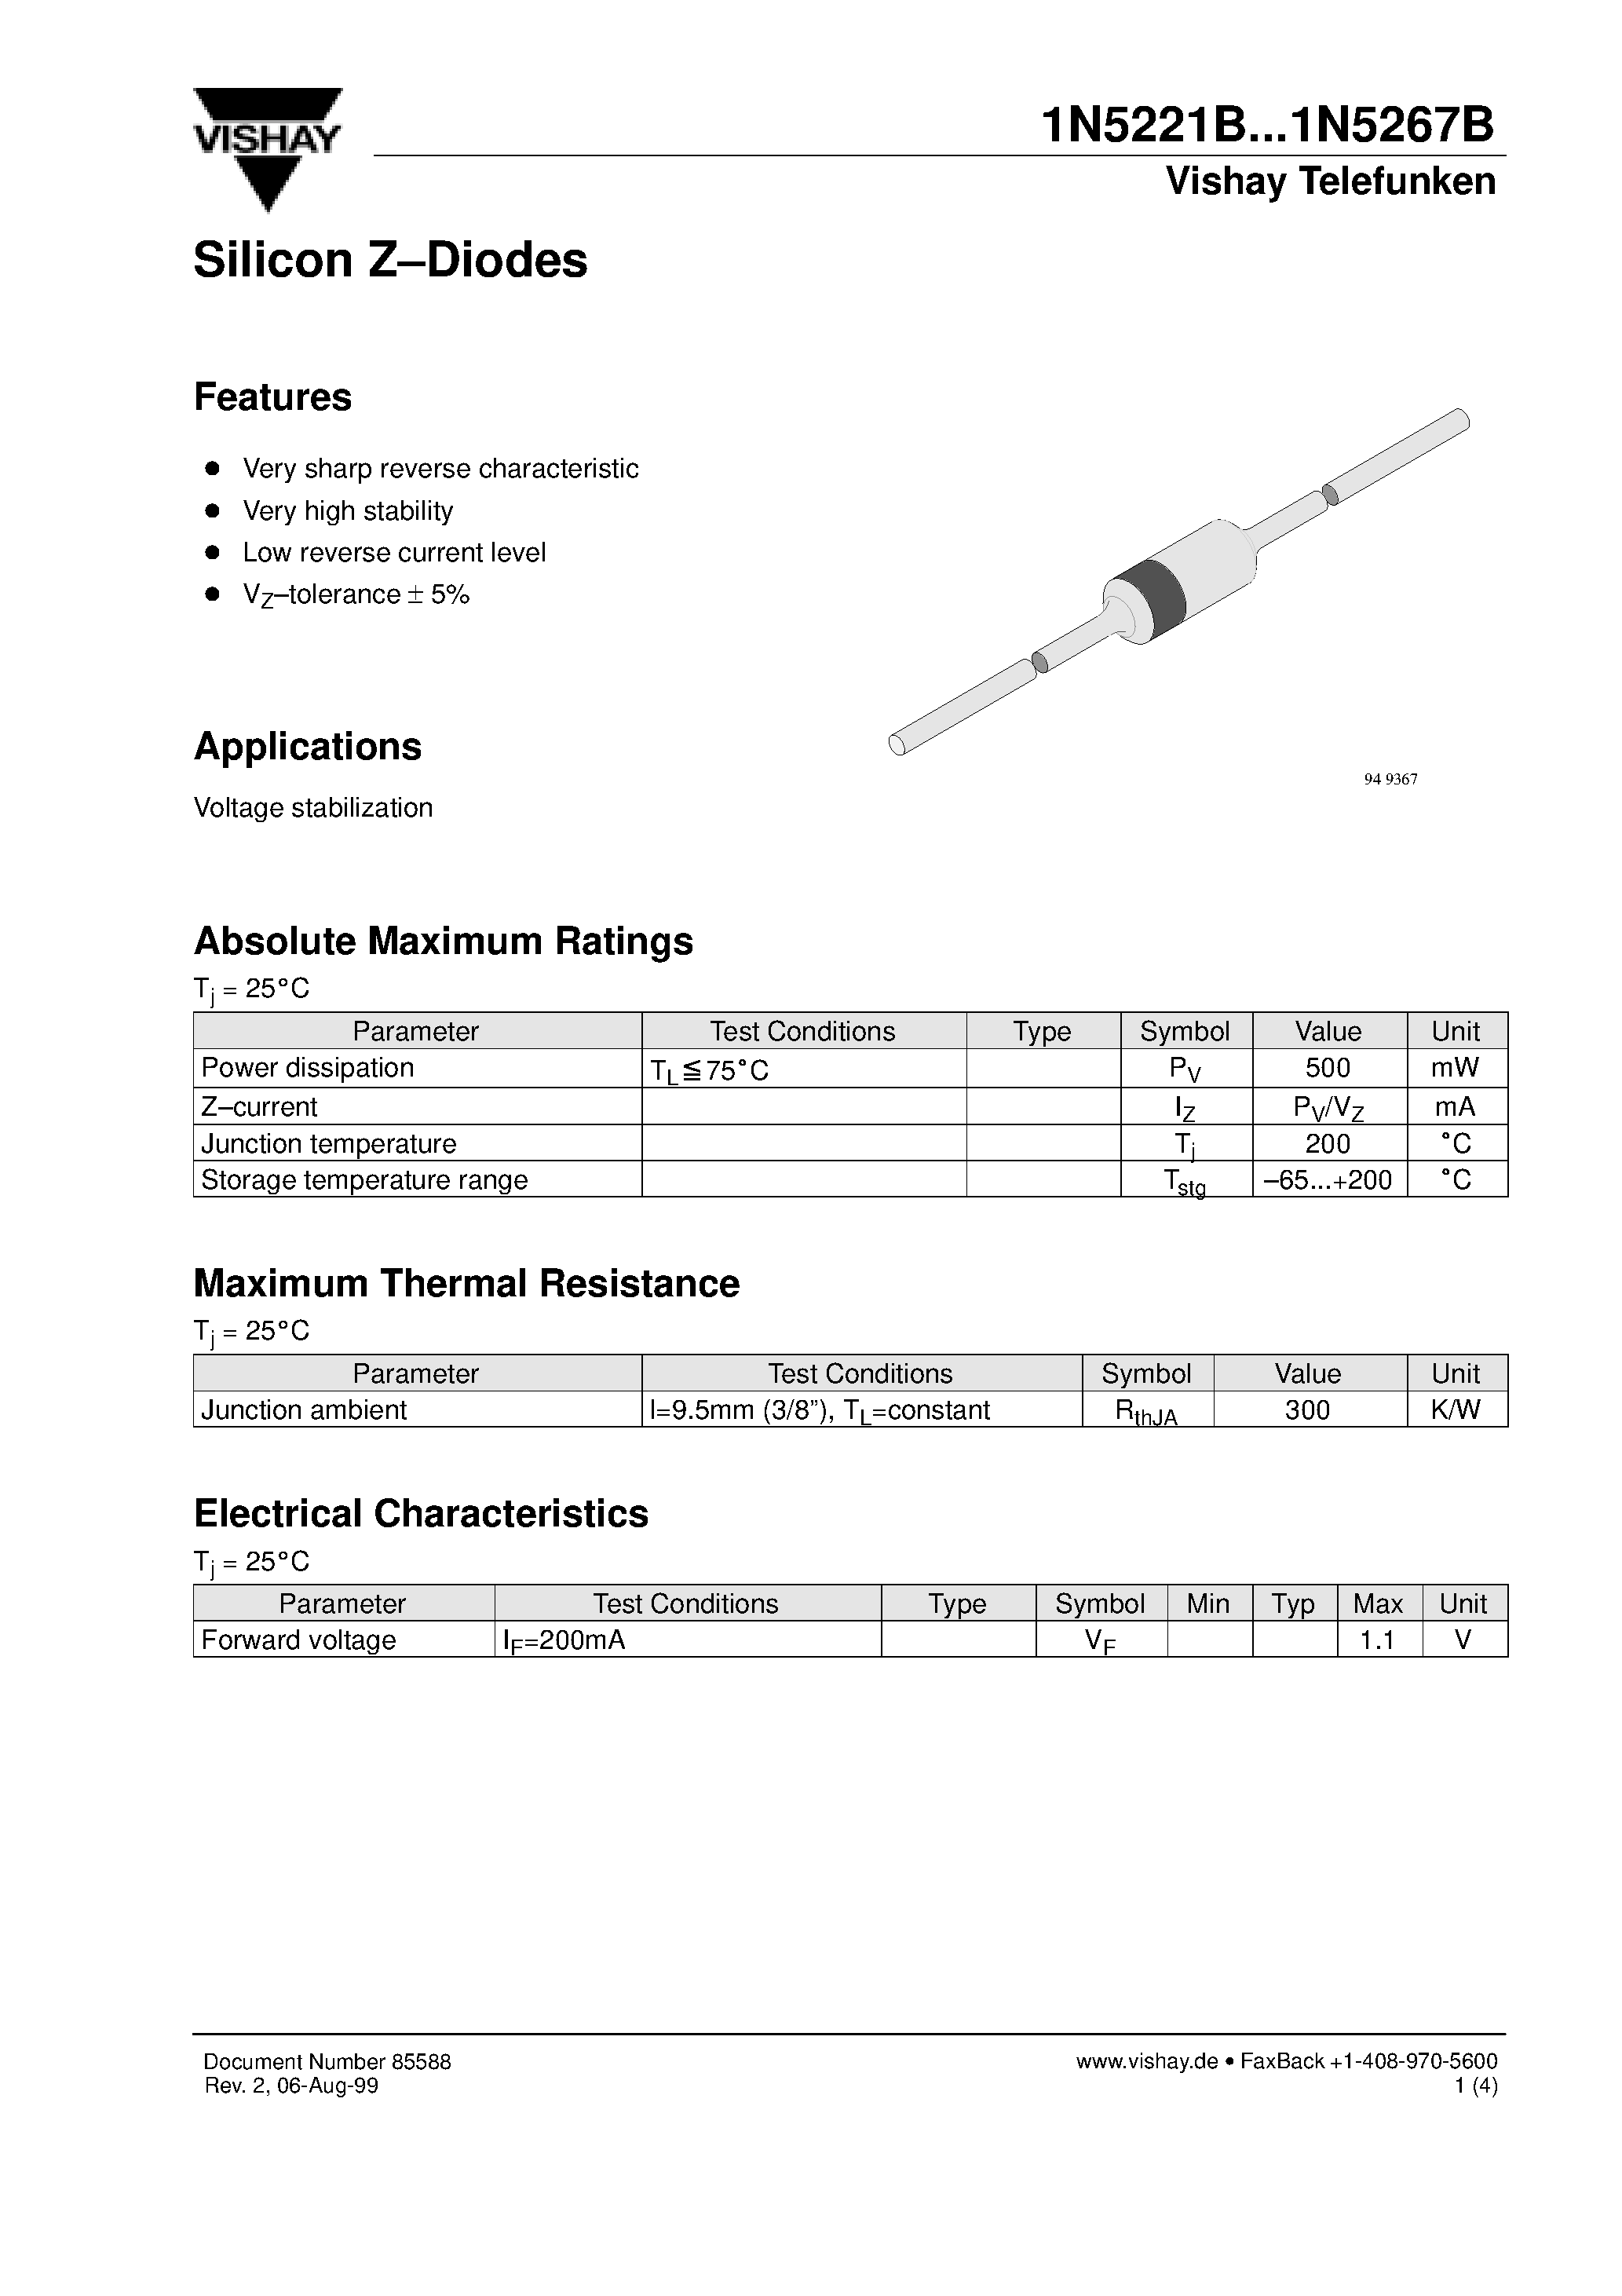 Datasheet 1N5255B - Silicon Z-Diodes page 1